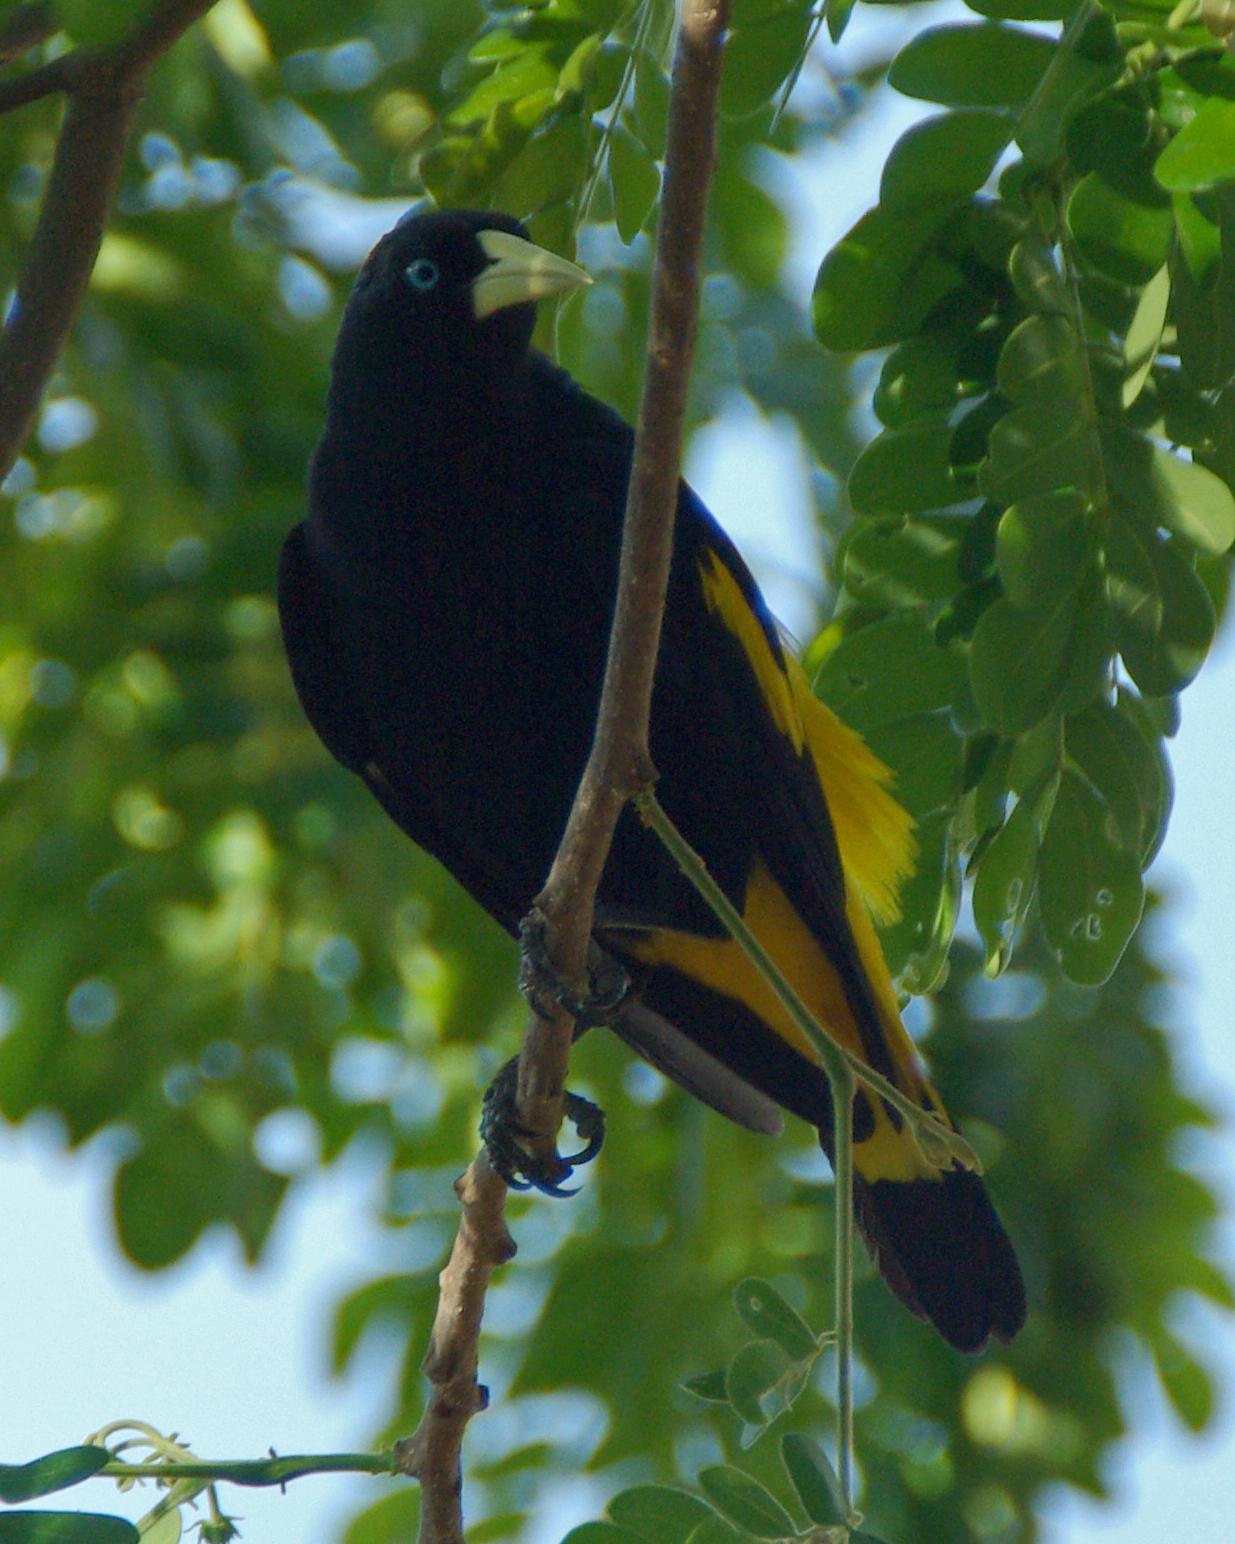 Yellow-rumped Cacique Photo by Robert Polkinghorn